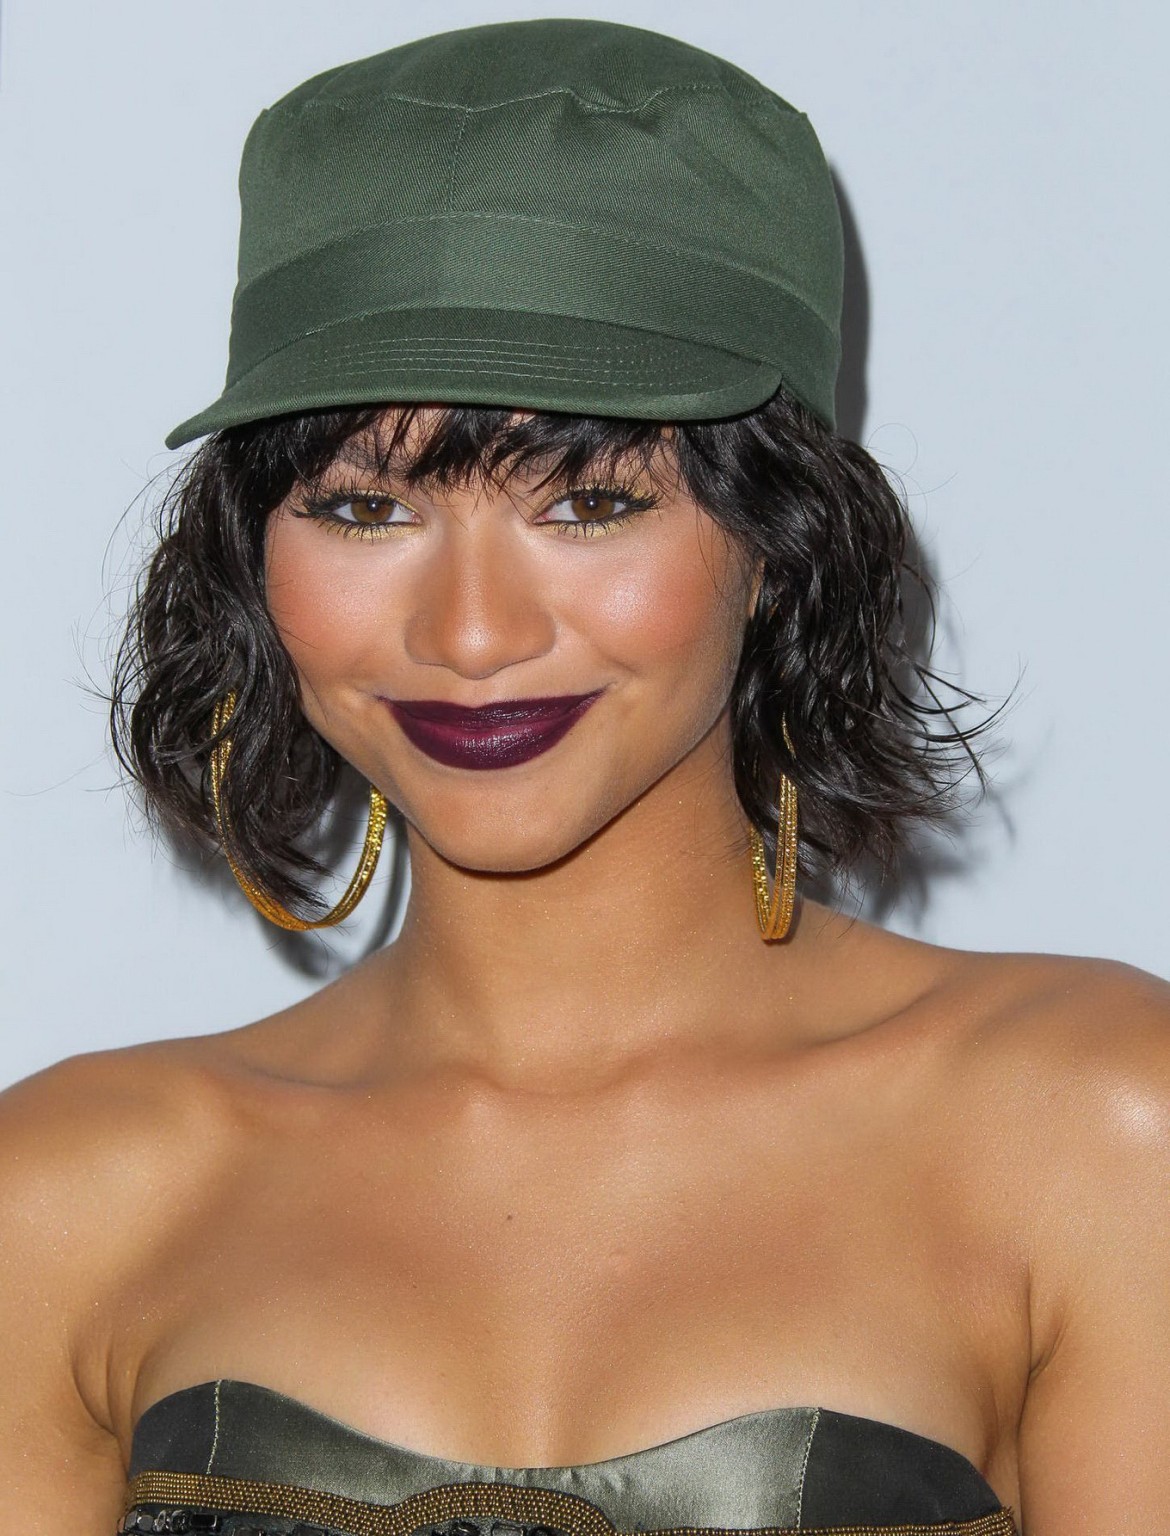 Zendaya Coleman shows off her boobs in a tiny belly top at BMI RB Hip Hop Awards #75187487